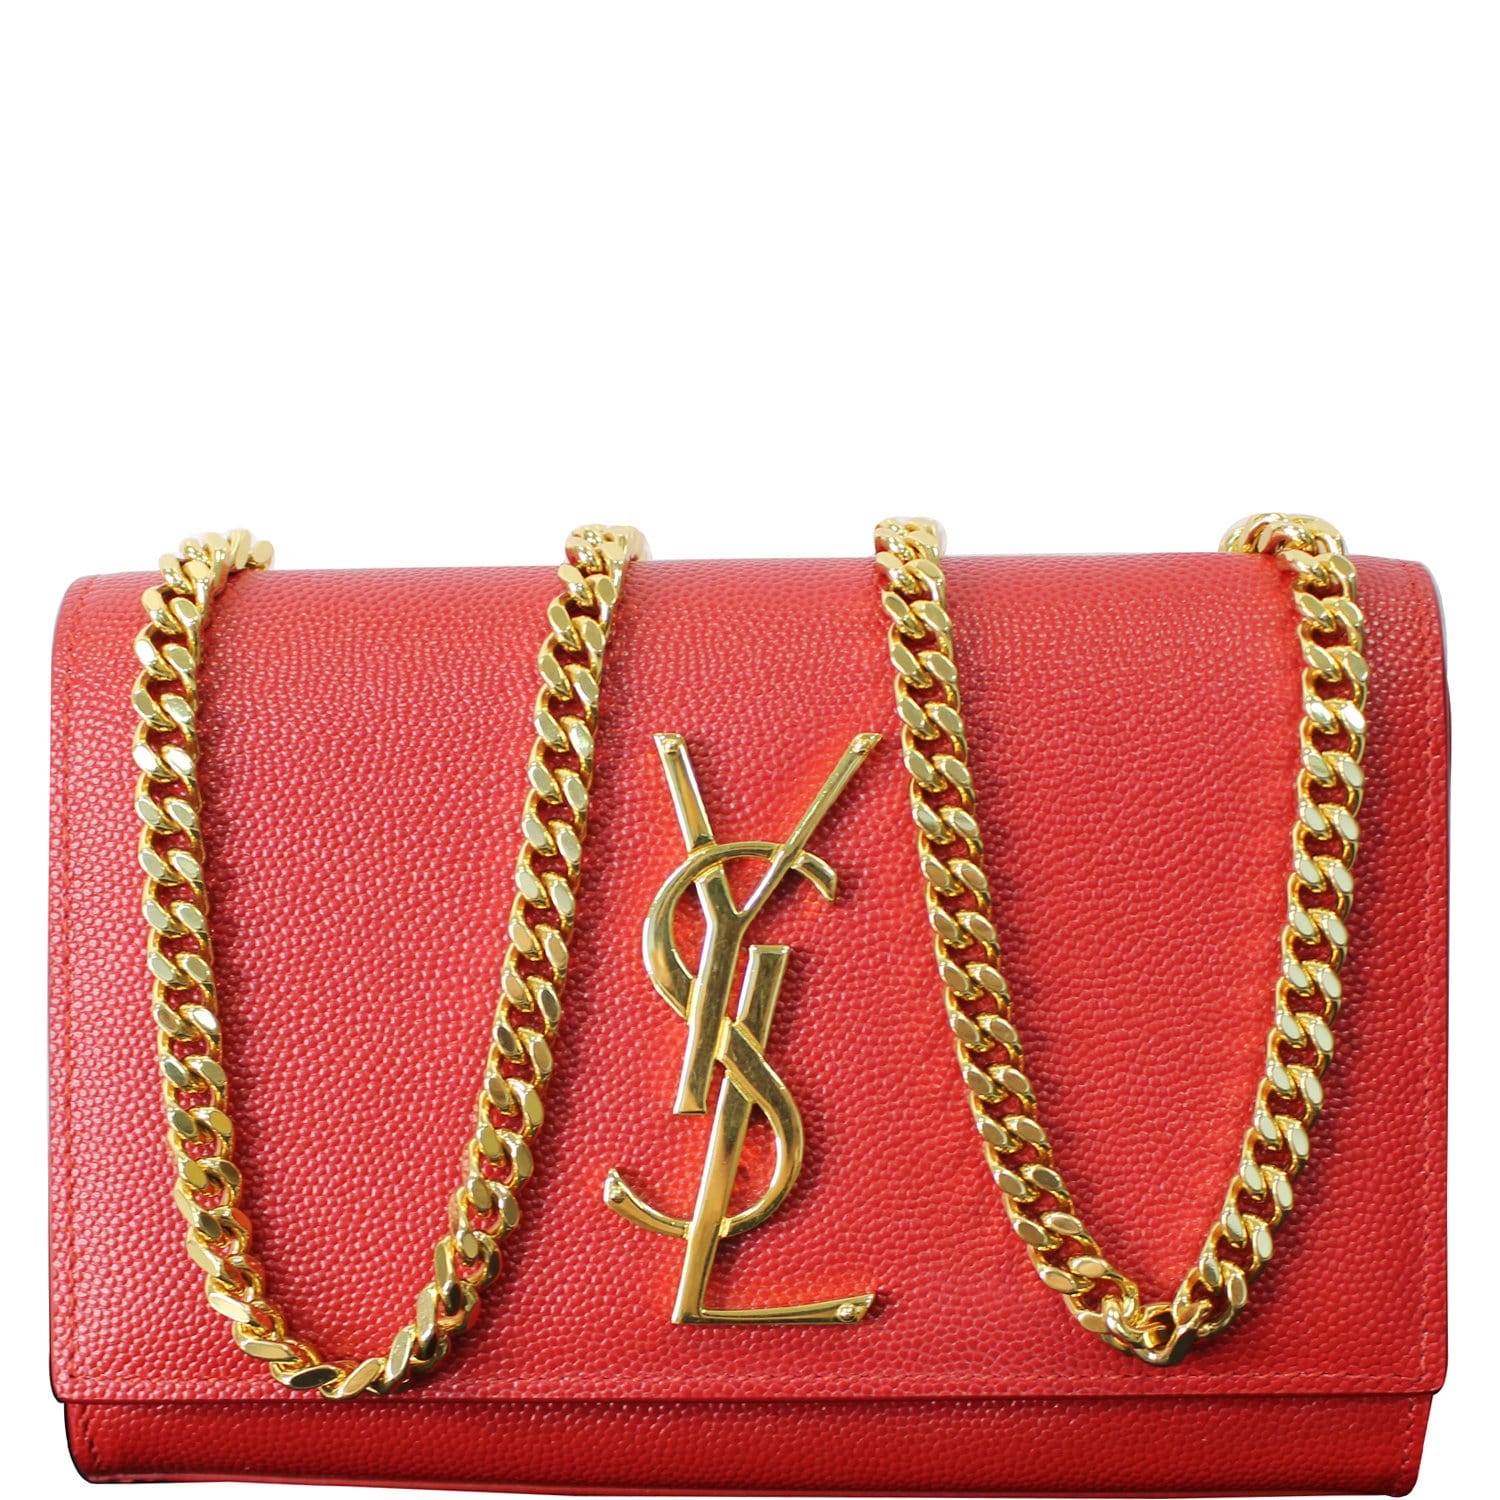 100% Authentic YSL Yves Saint Laurent Kate Small Bag